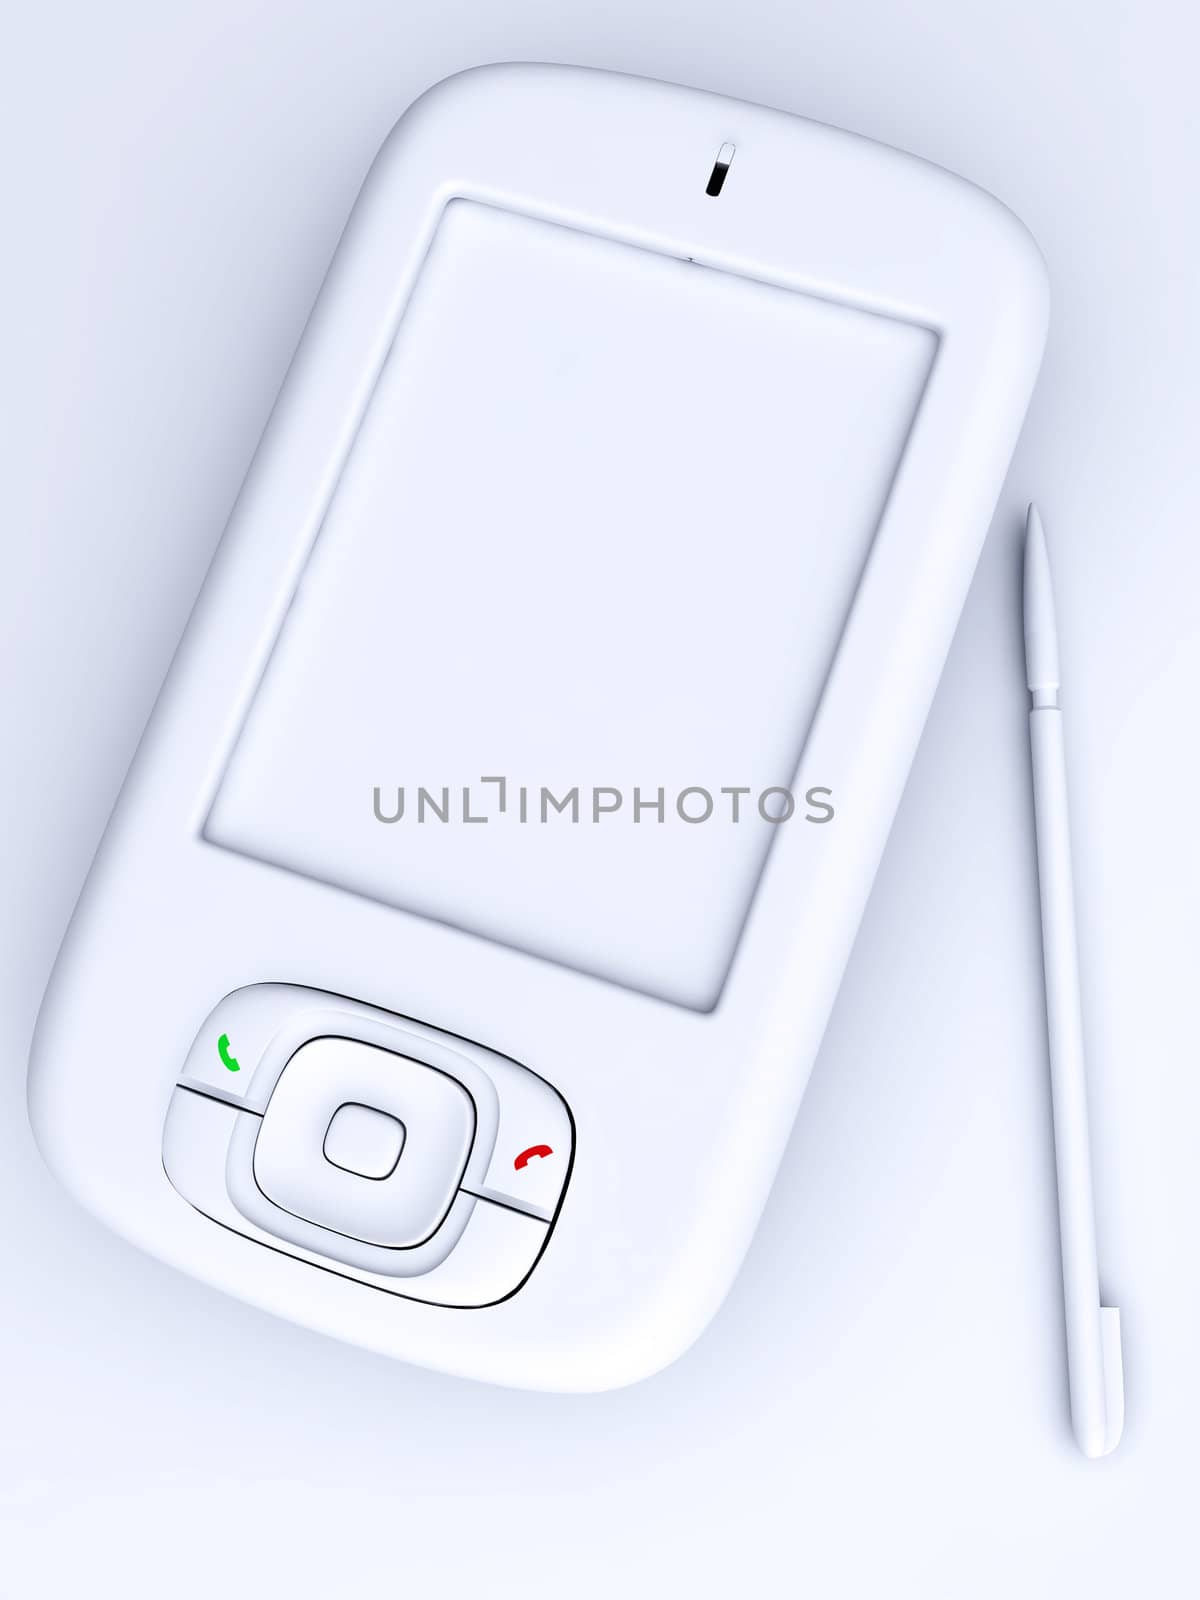 Modern white communicator or smartphone for use as an organizer and business assistant